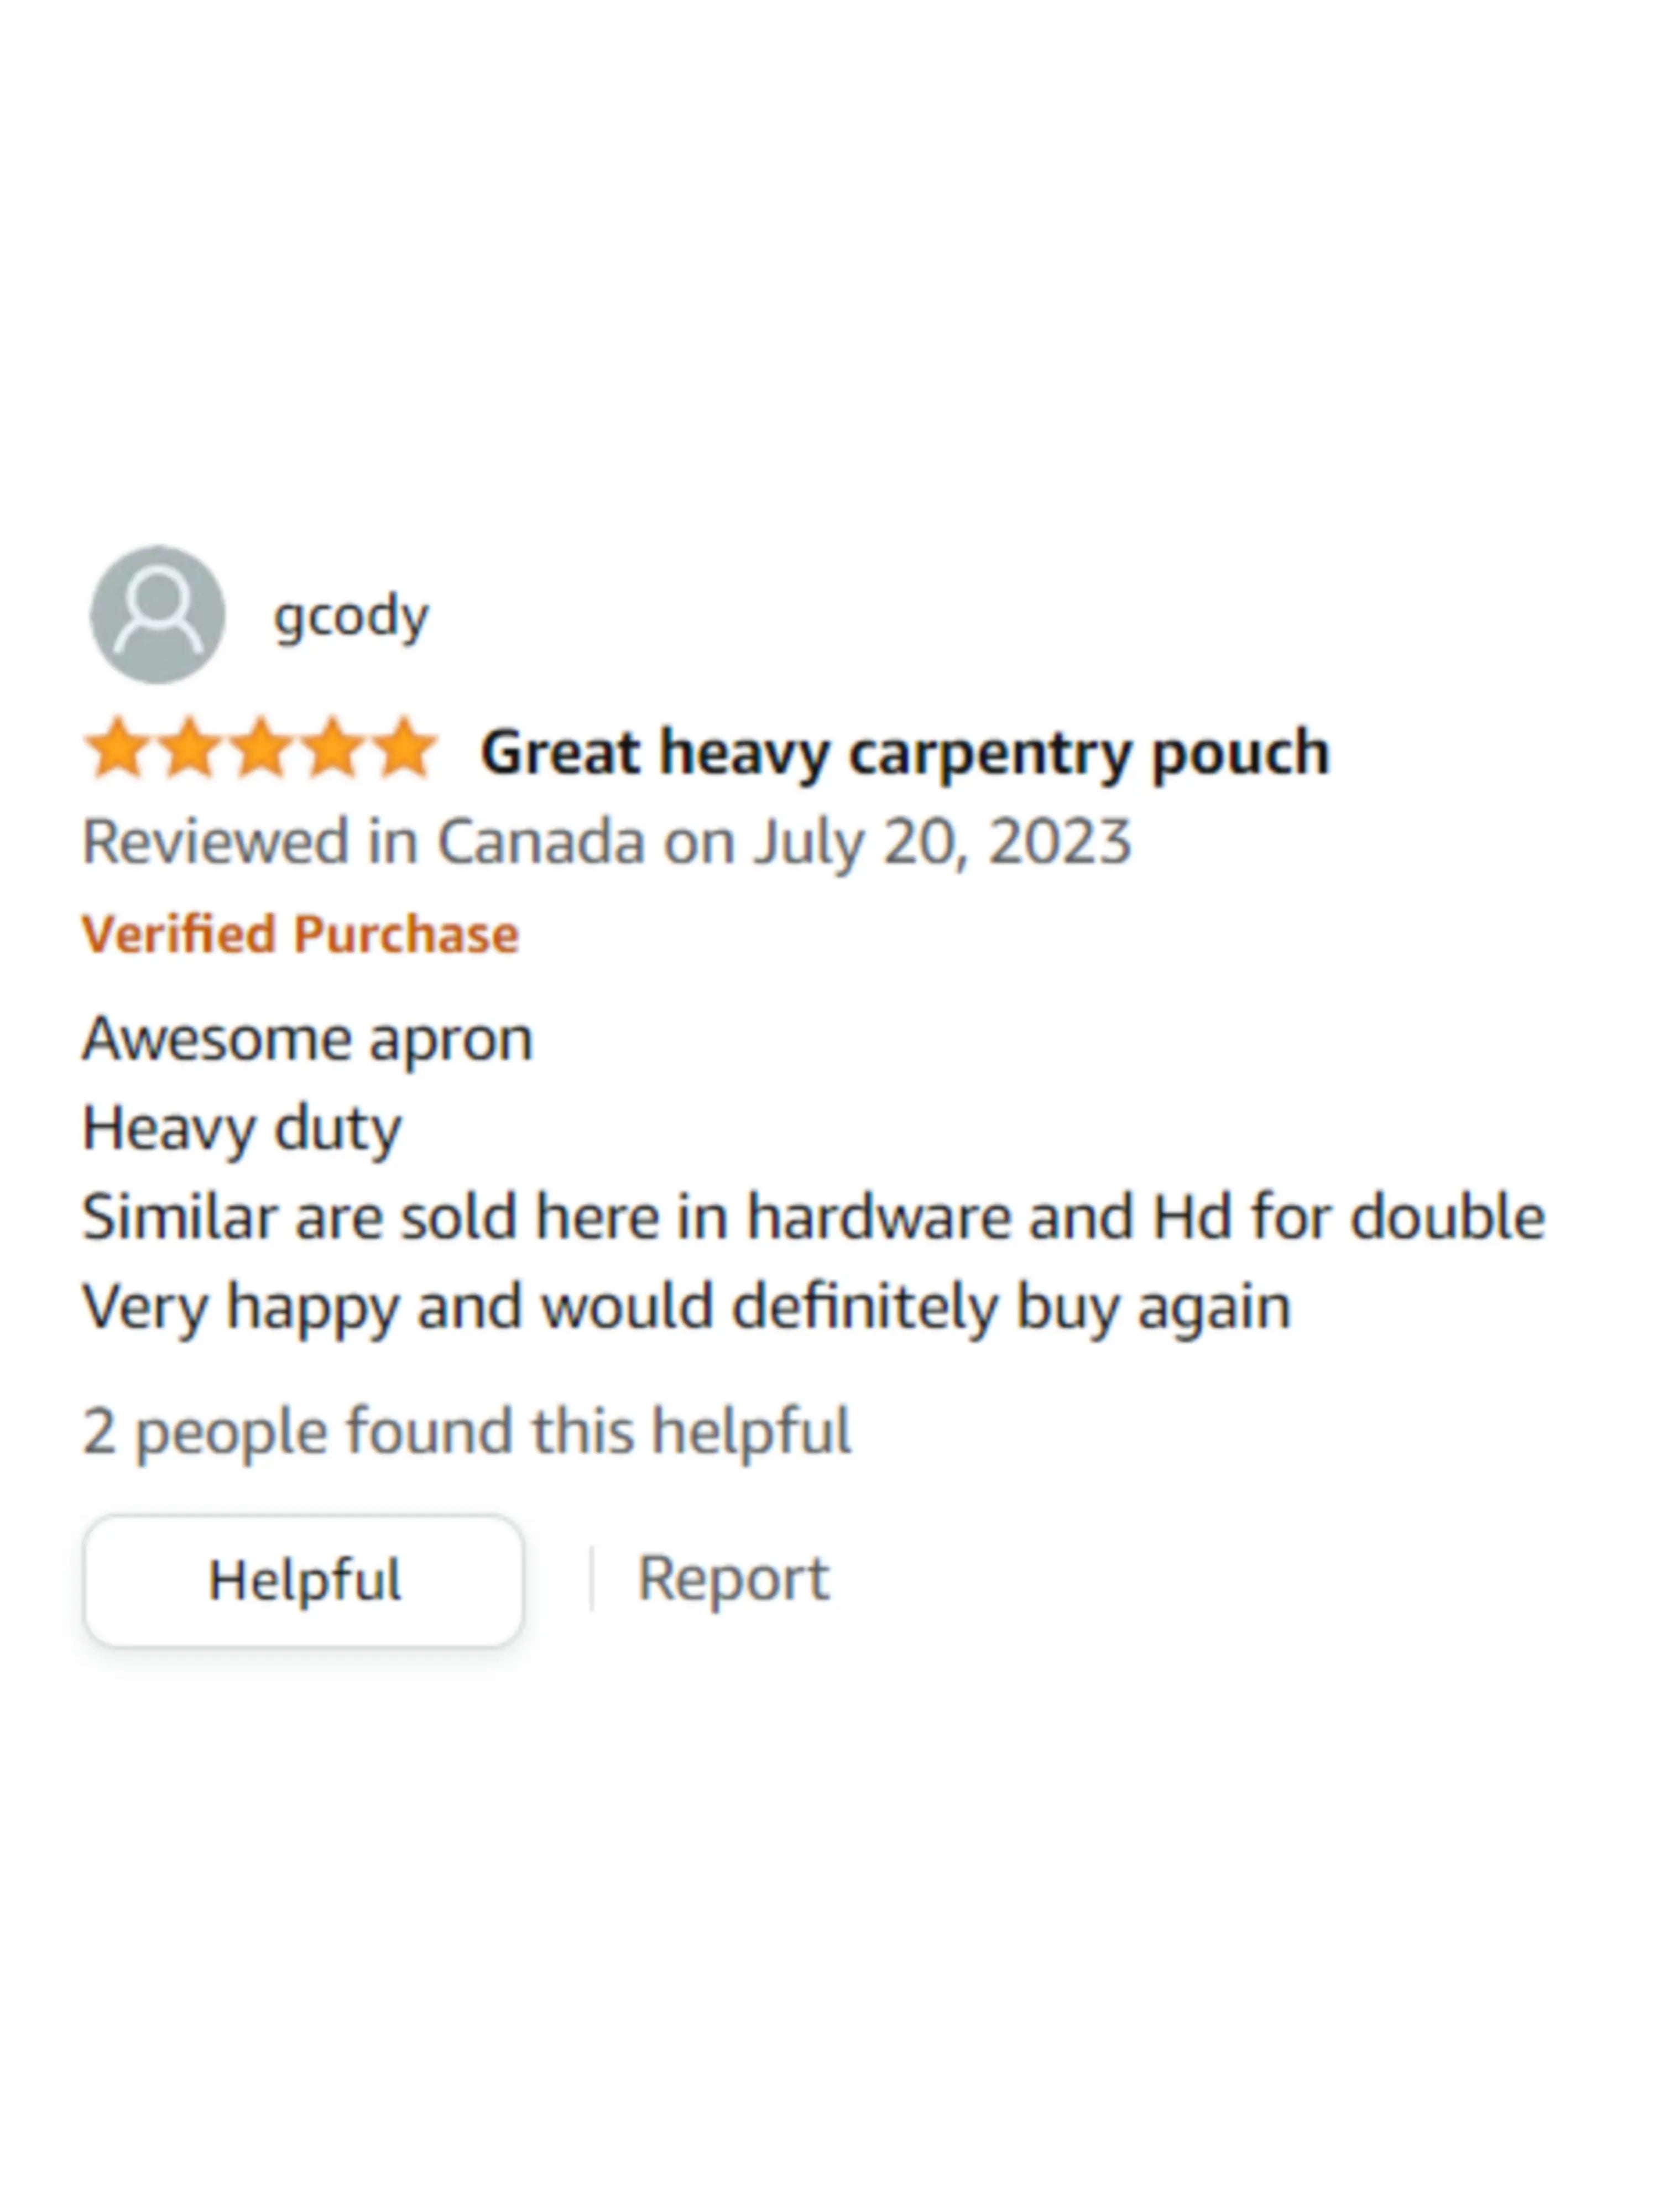 5 Star Amazon Review for RM tool belt, Carpenter pouch